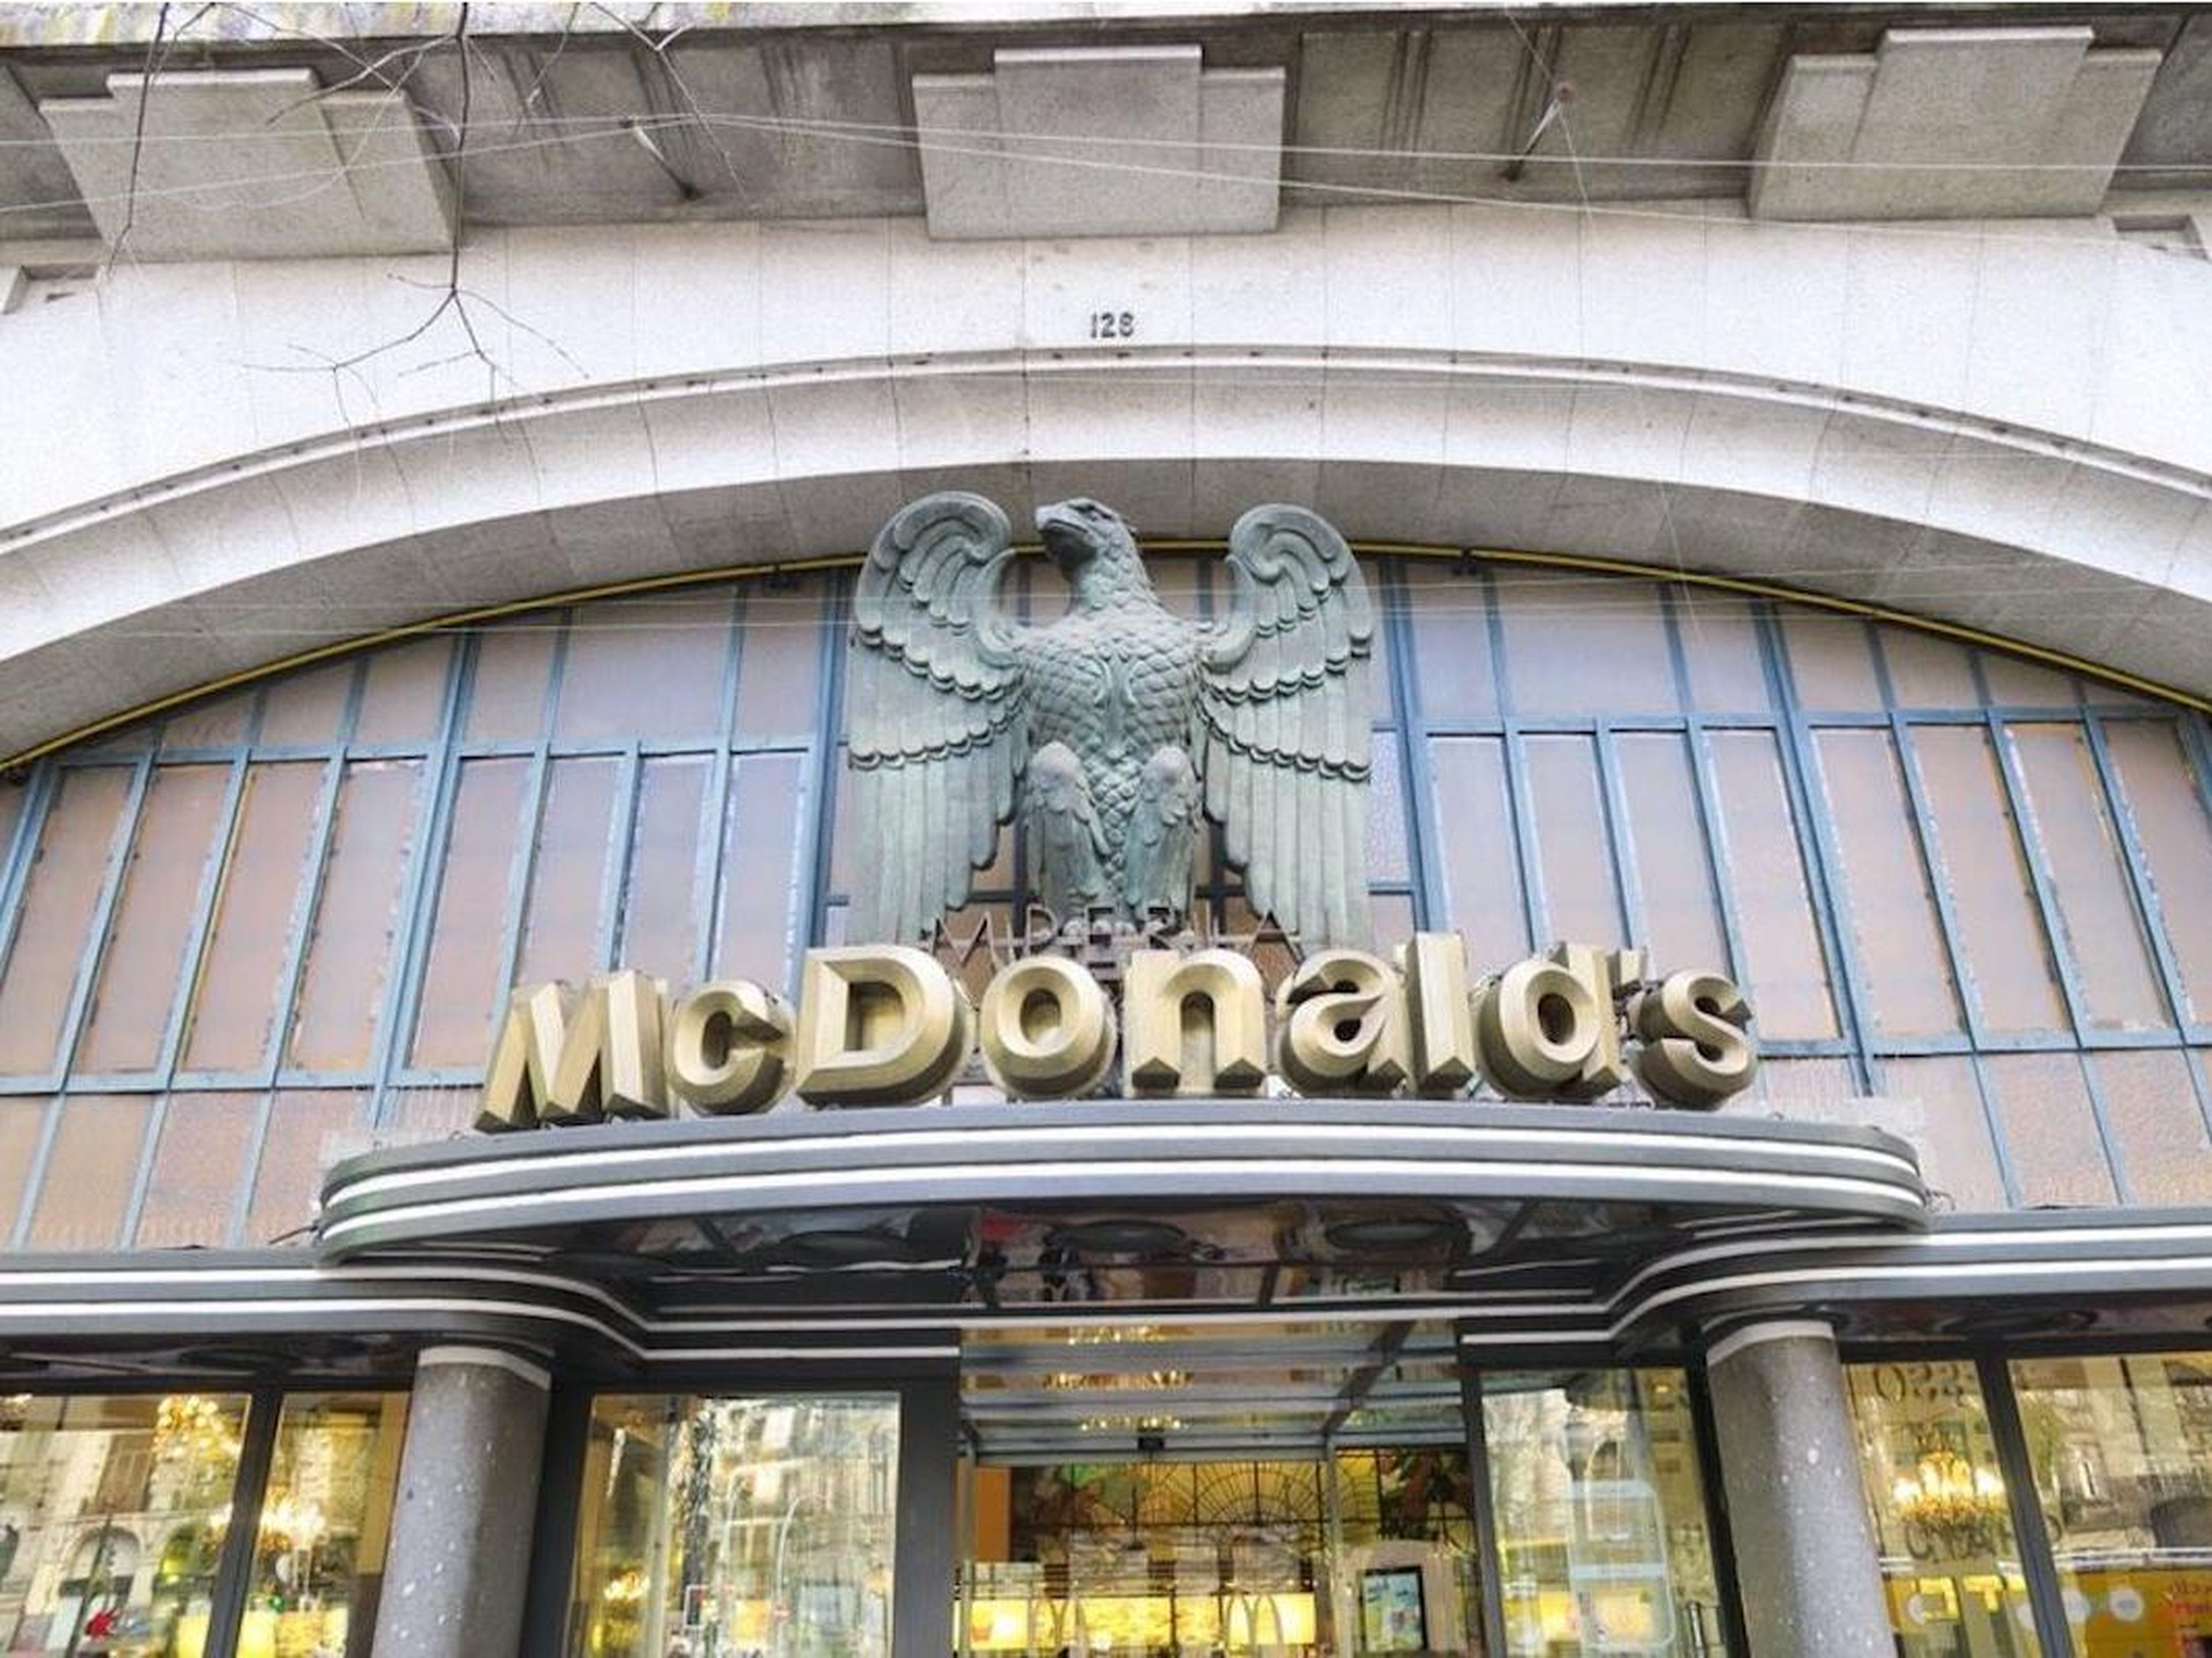 In Porto, Portugal, a historic building from the 1930s that was once known as the Imperial Cafe is now home to a McDonald's.